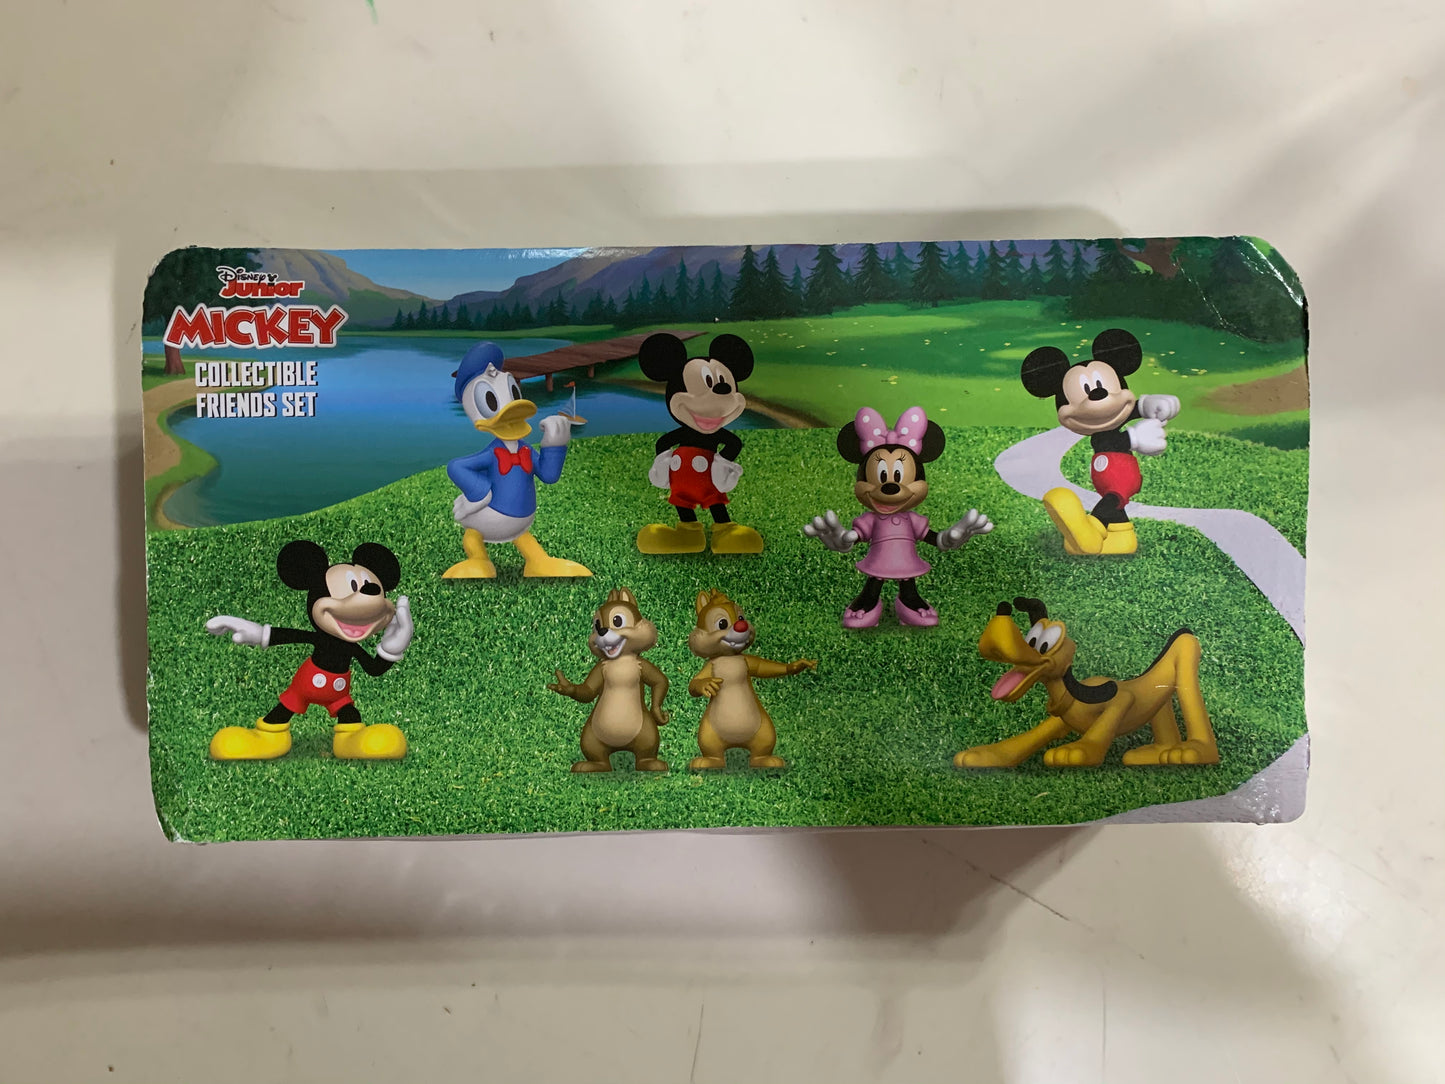 Mickey Collectible Friends Set 38531